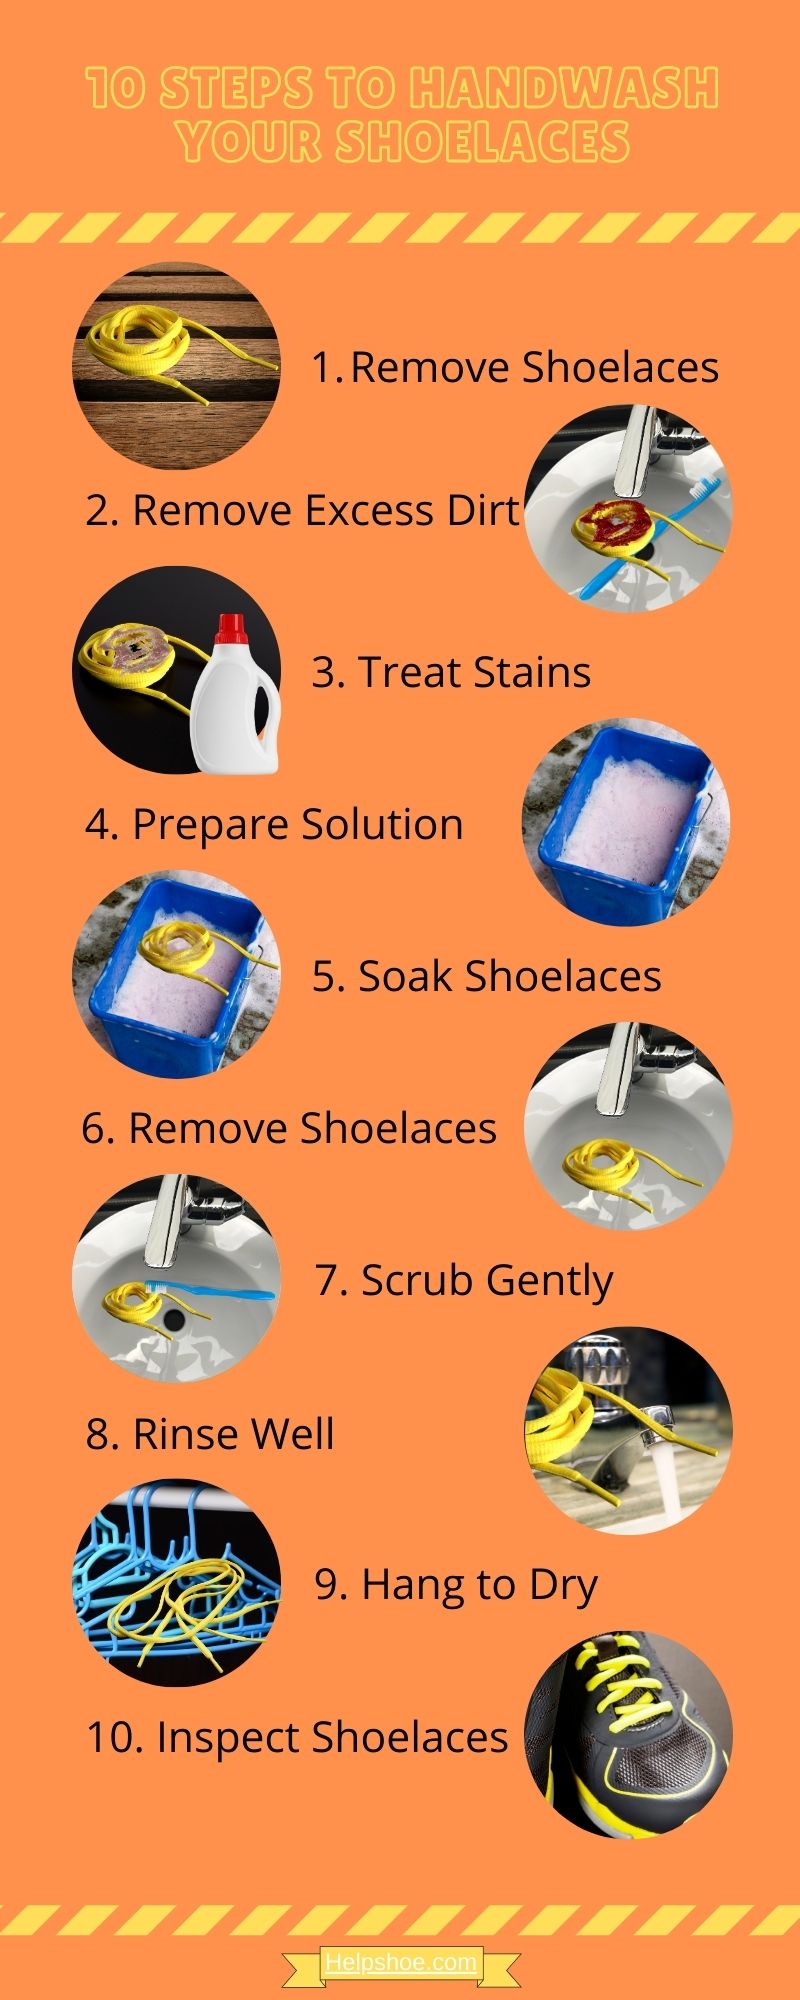 10 Steps to handWash your Shoelaces